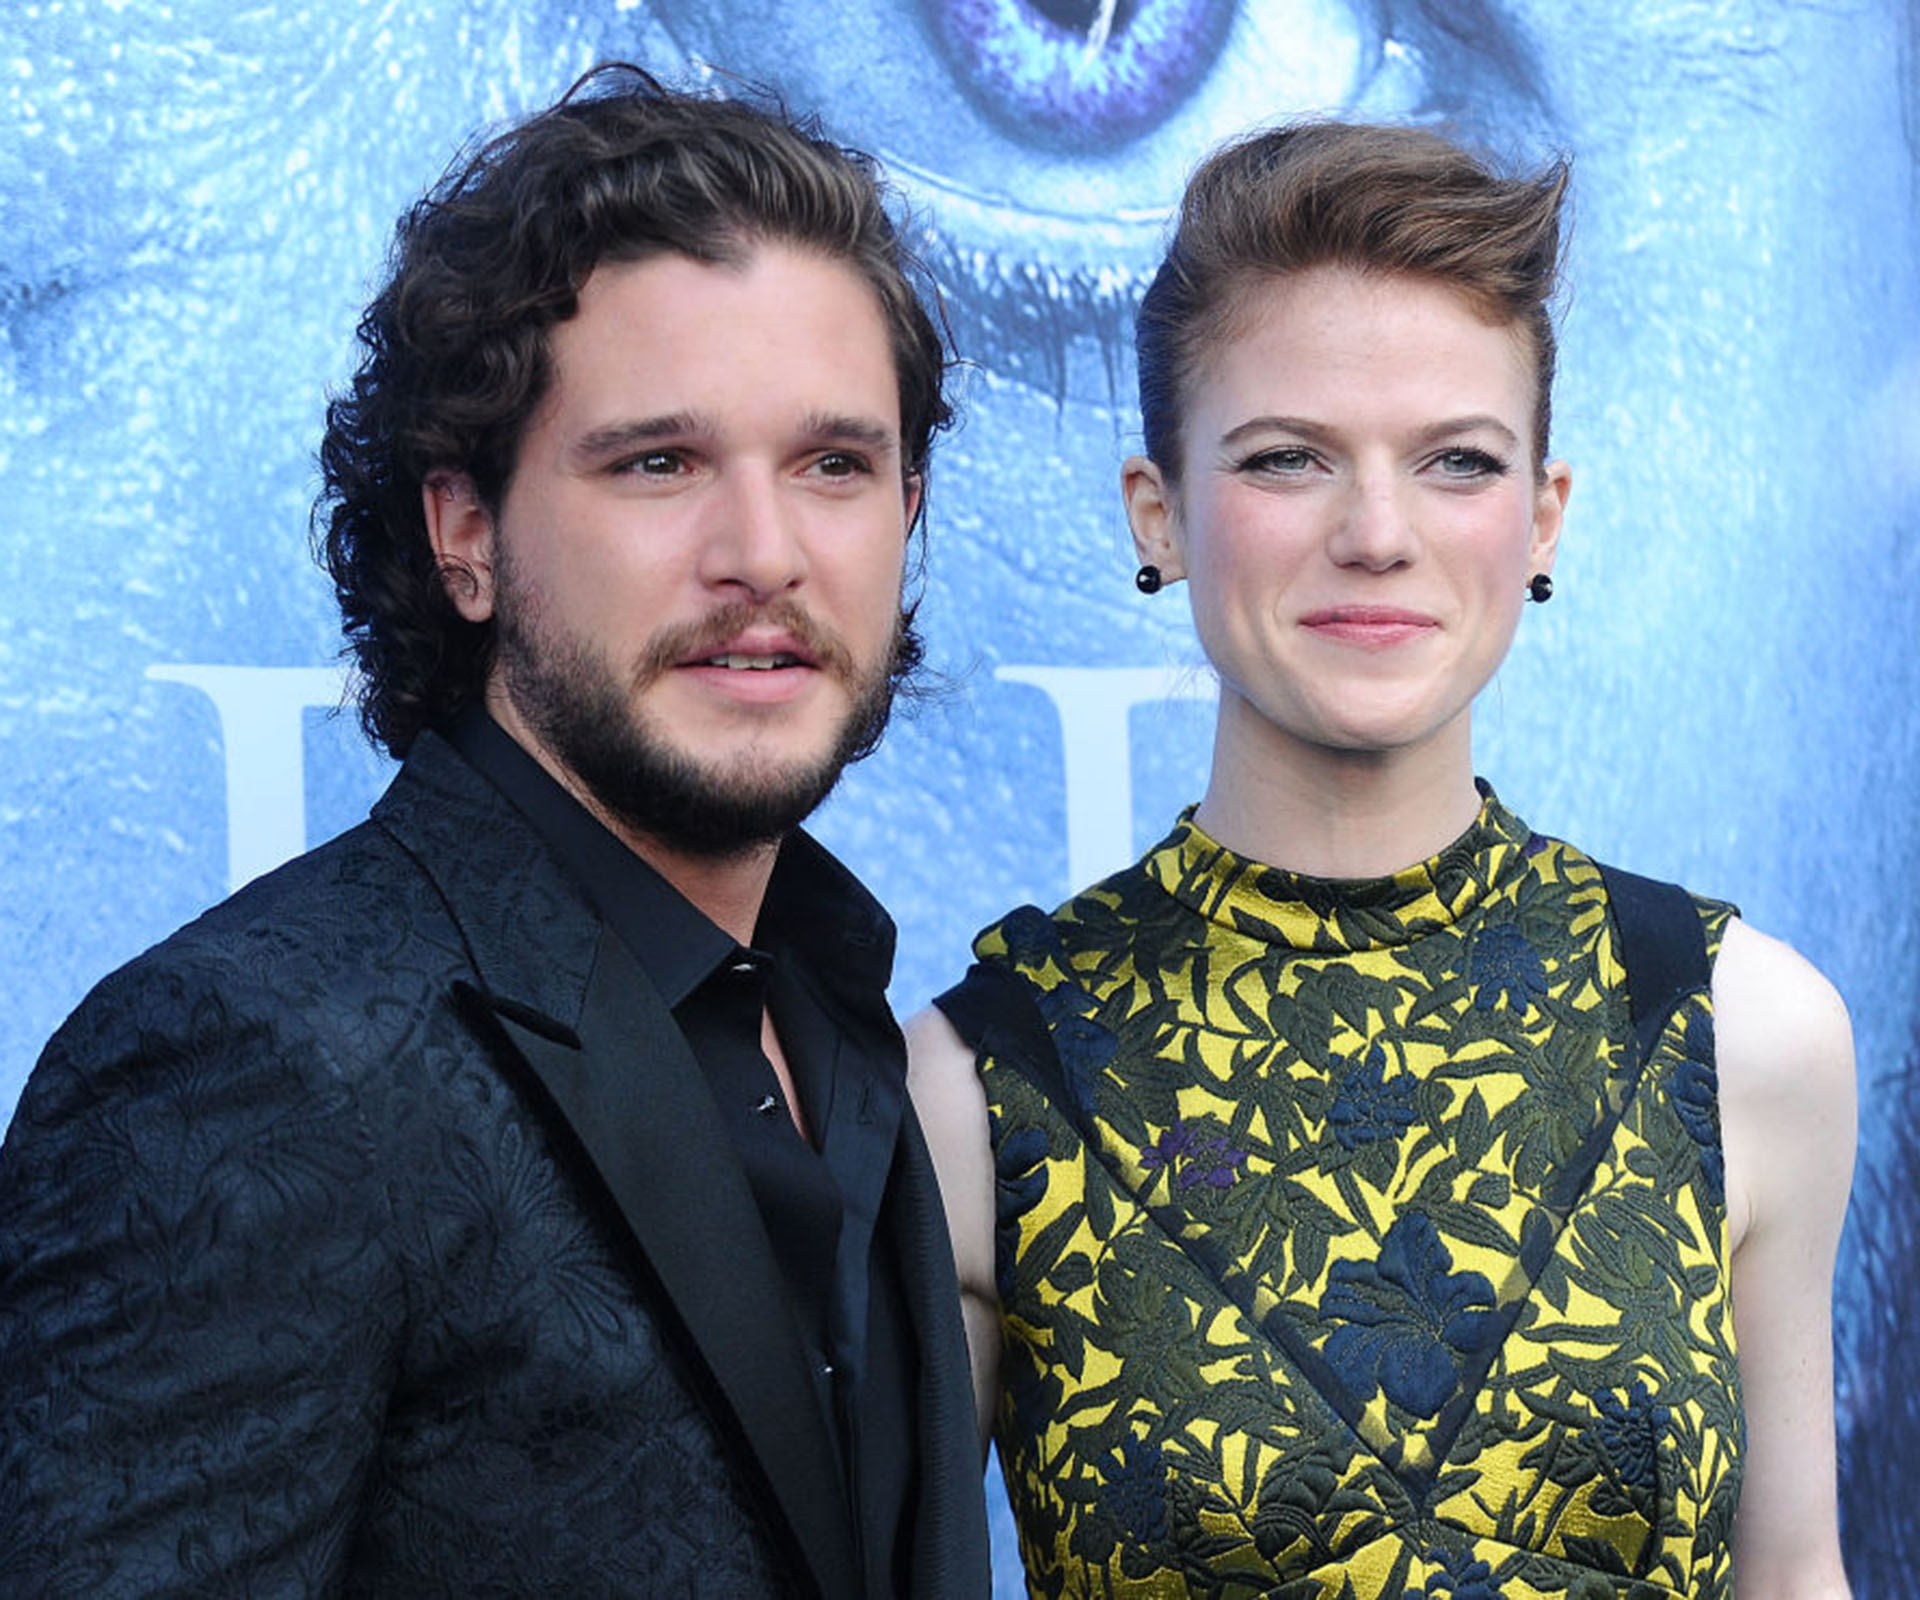 Are Game of Thrones lovebirds Kit Harington and Rose Leslie already engaged?